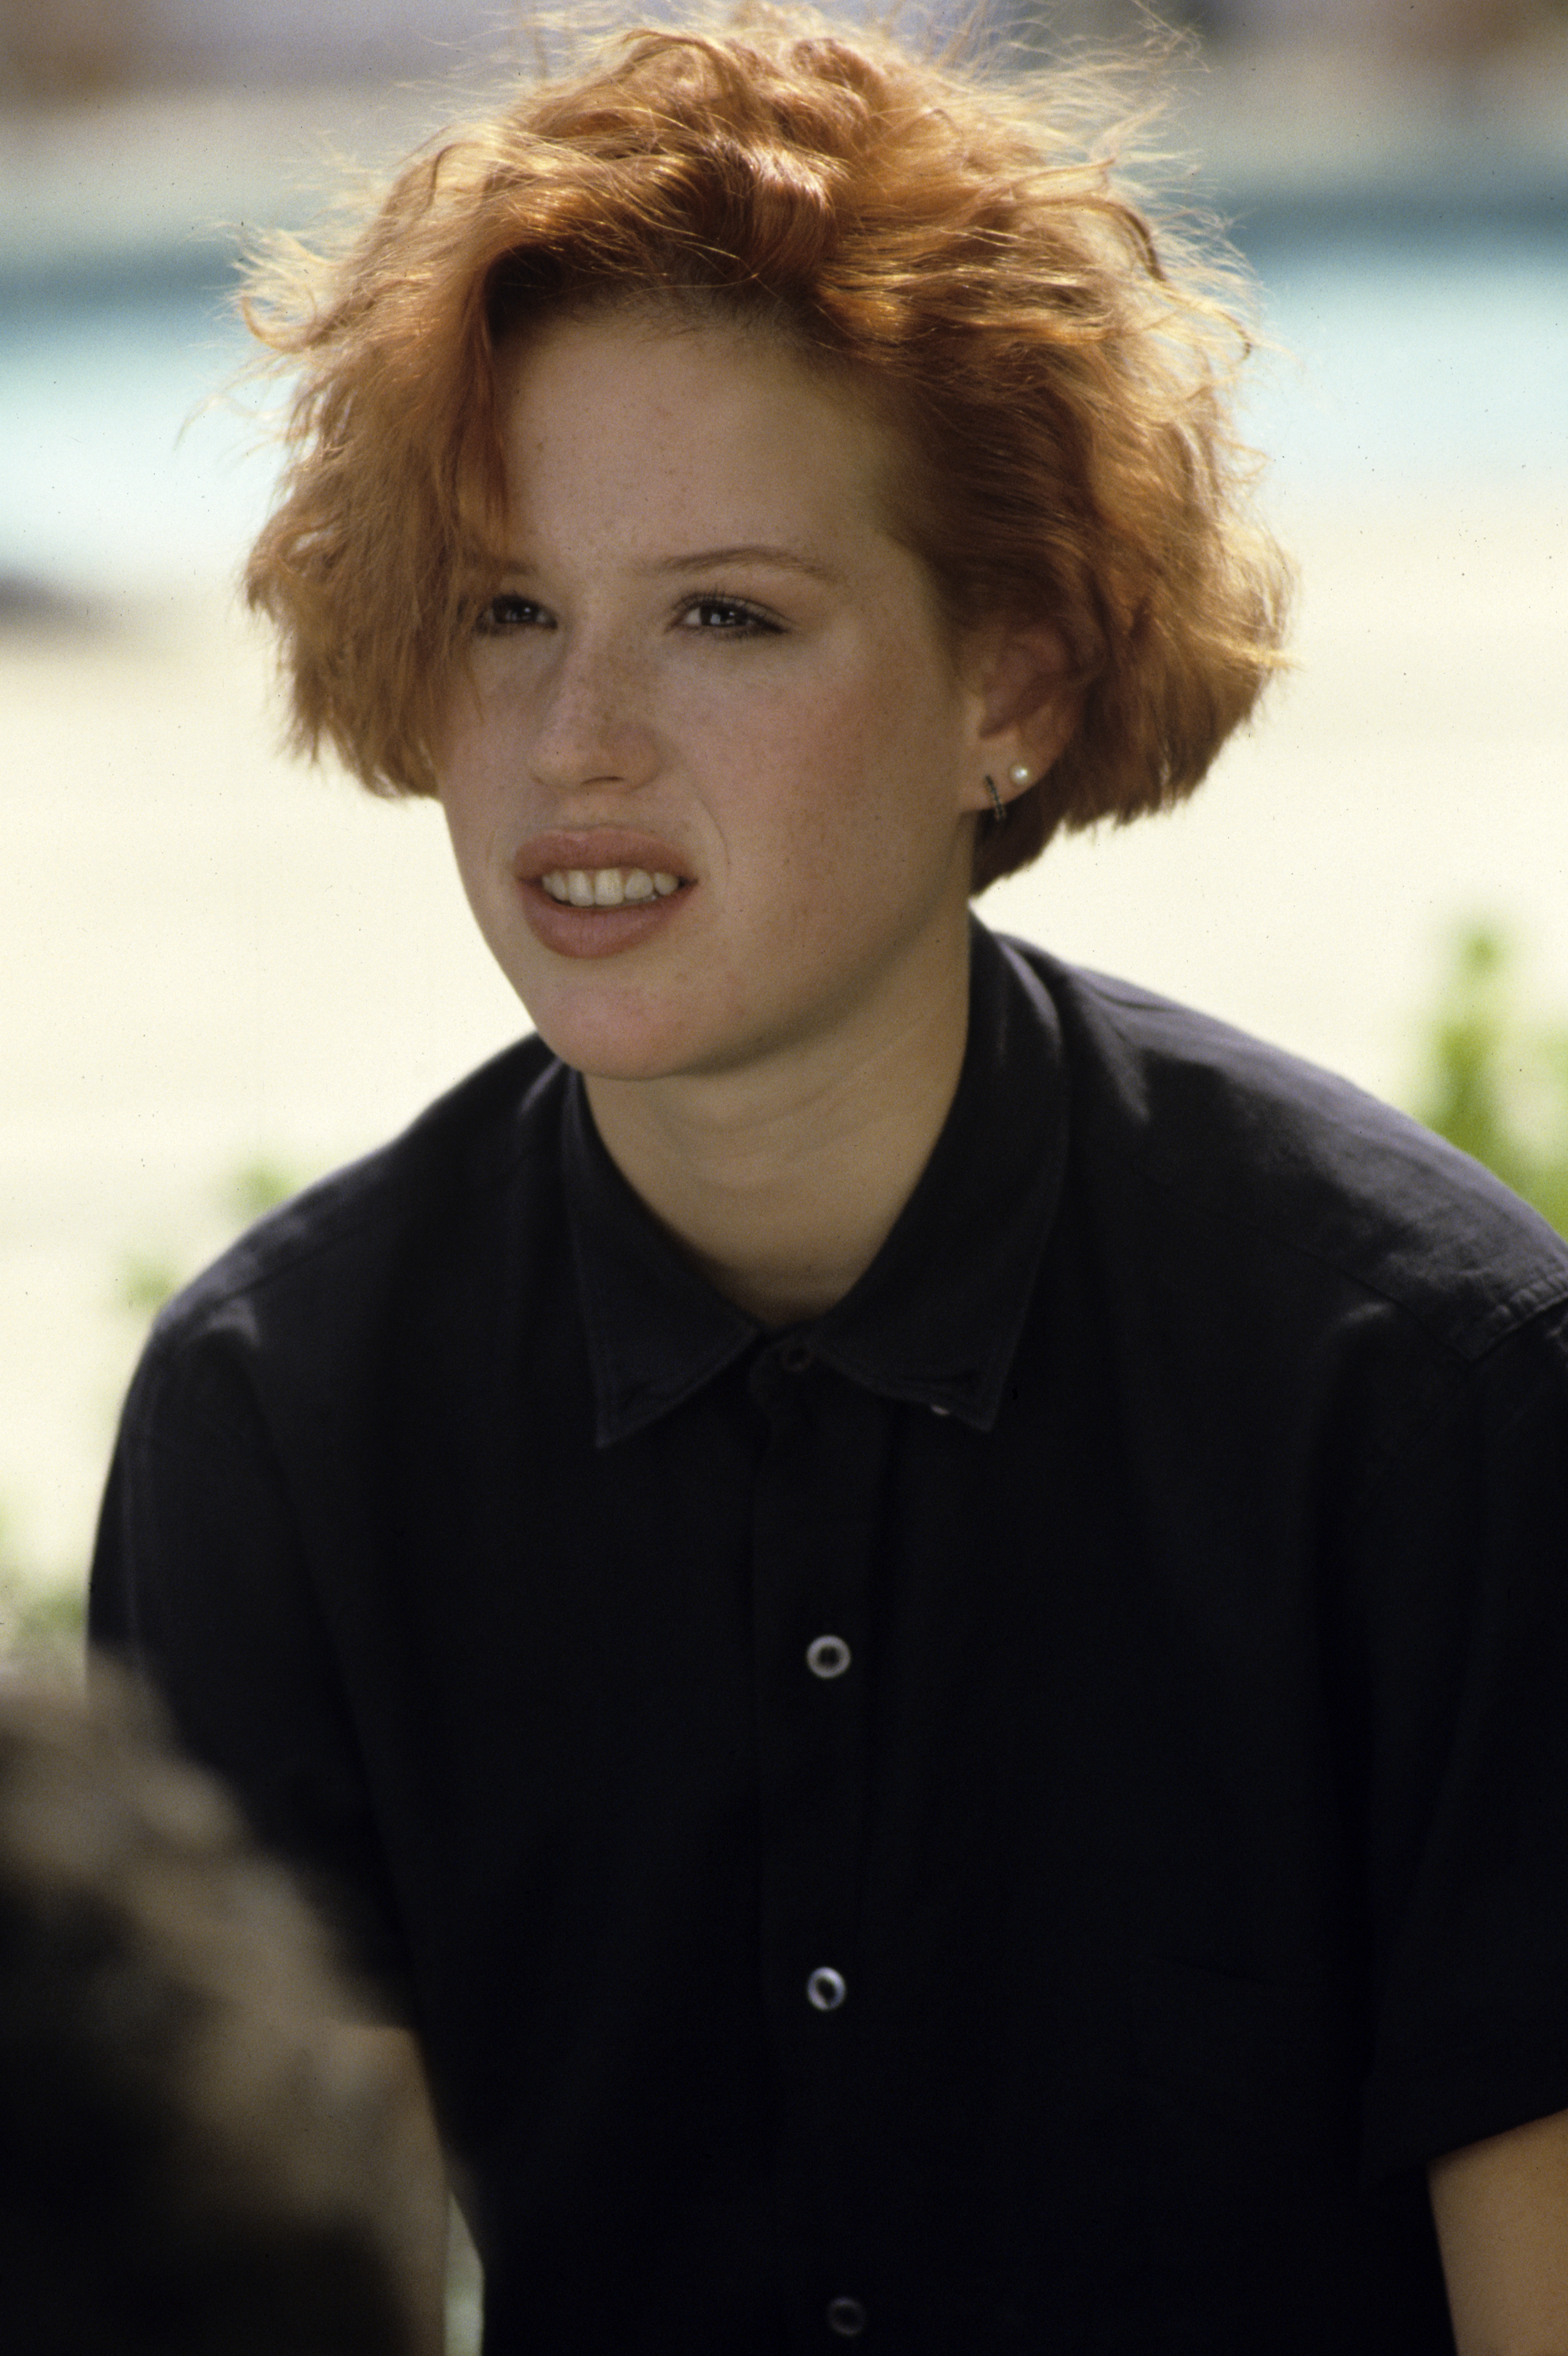 Molly Ringwald as Lonnie in "Surviving: A Family Crisis" on February 10, 1985 | Source: Getty Images